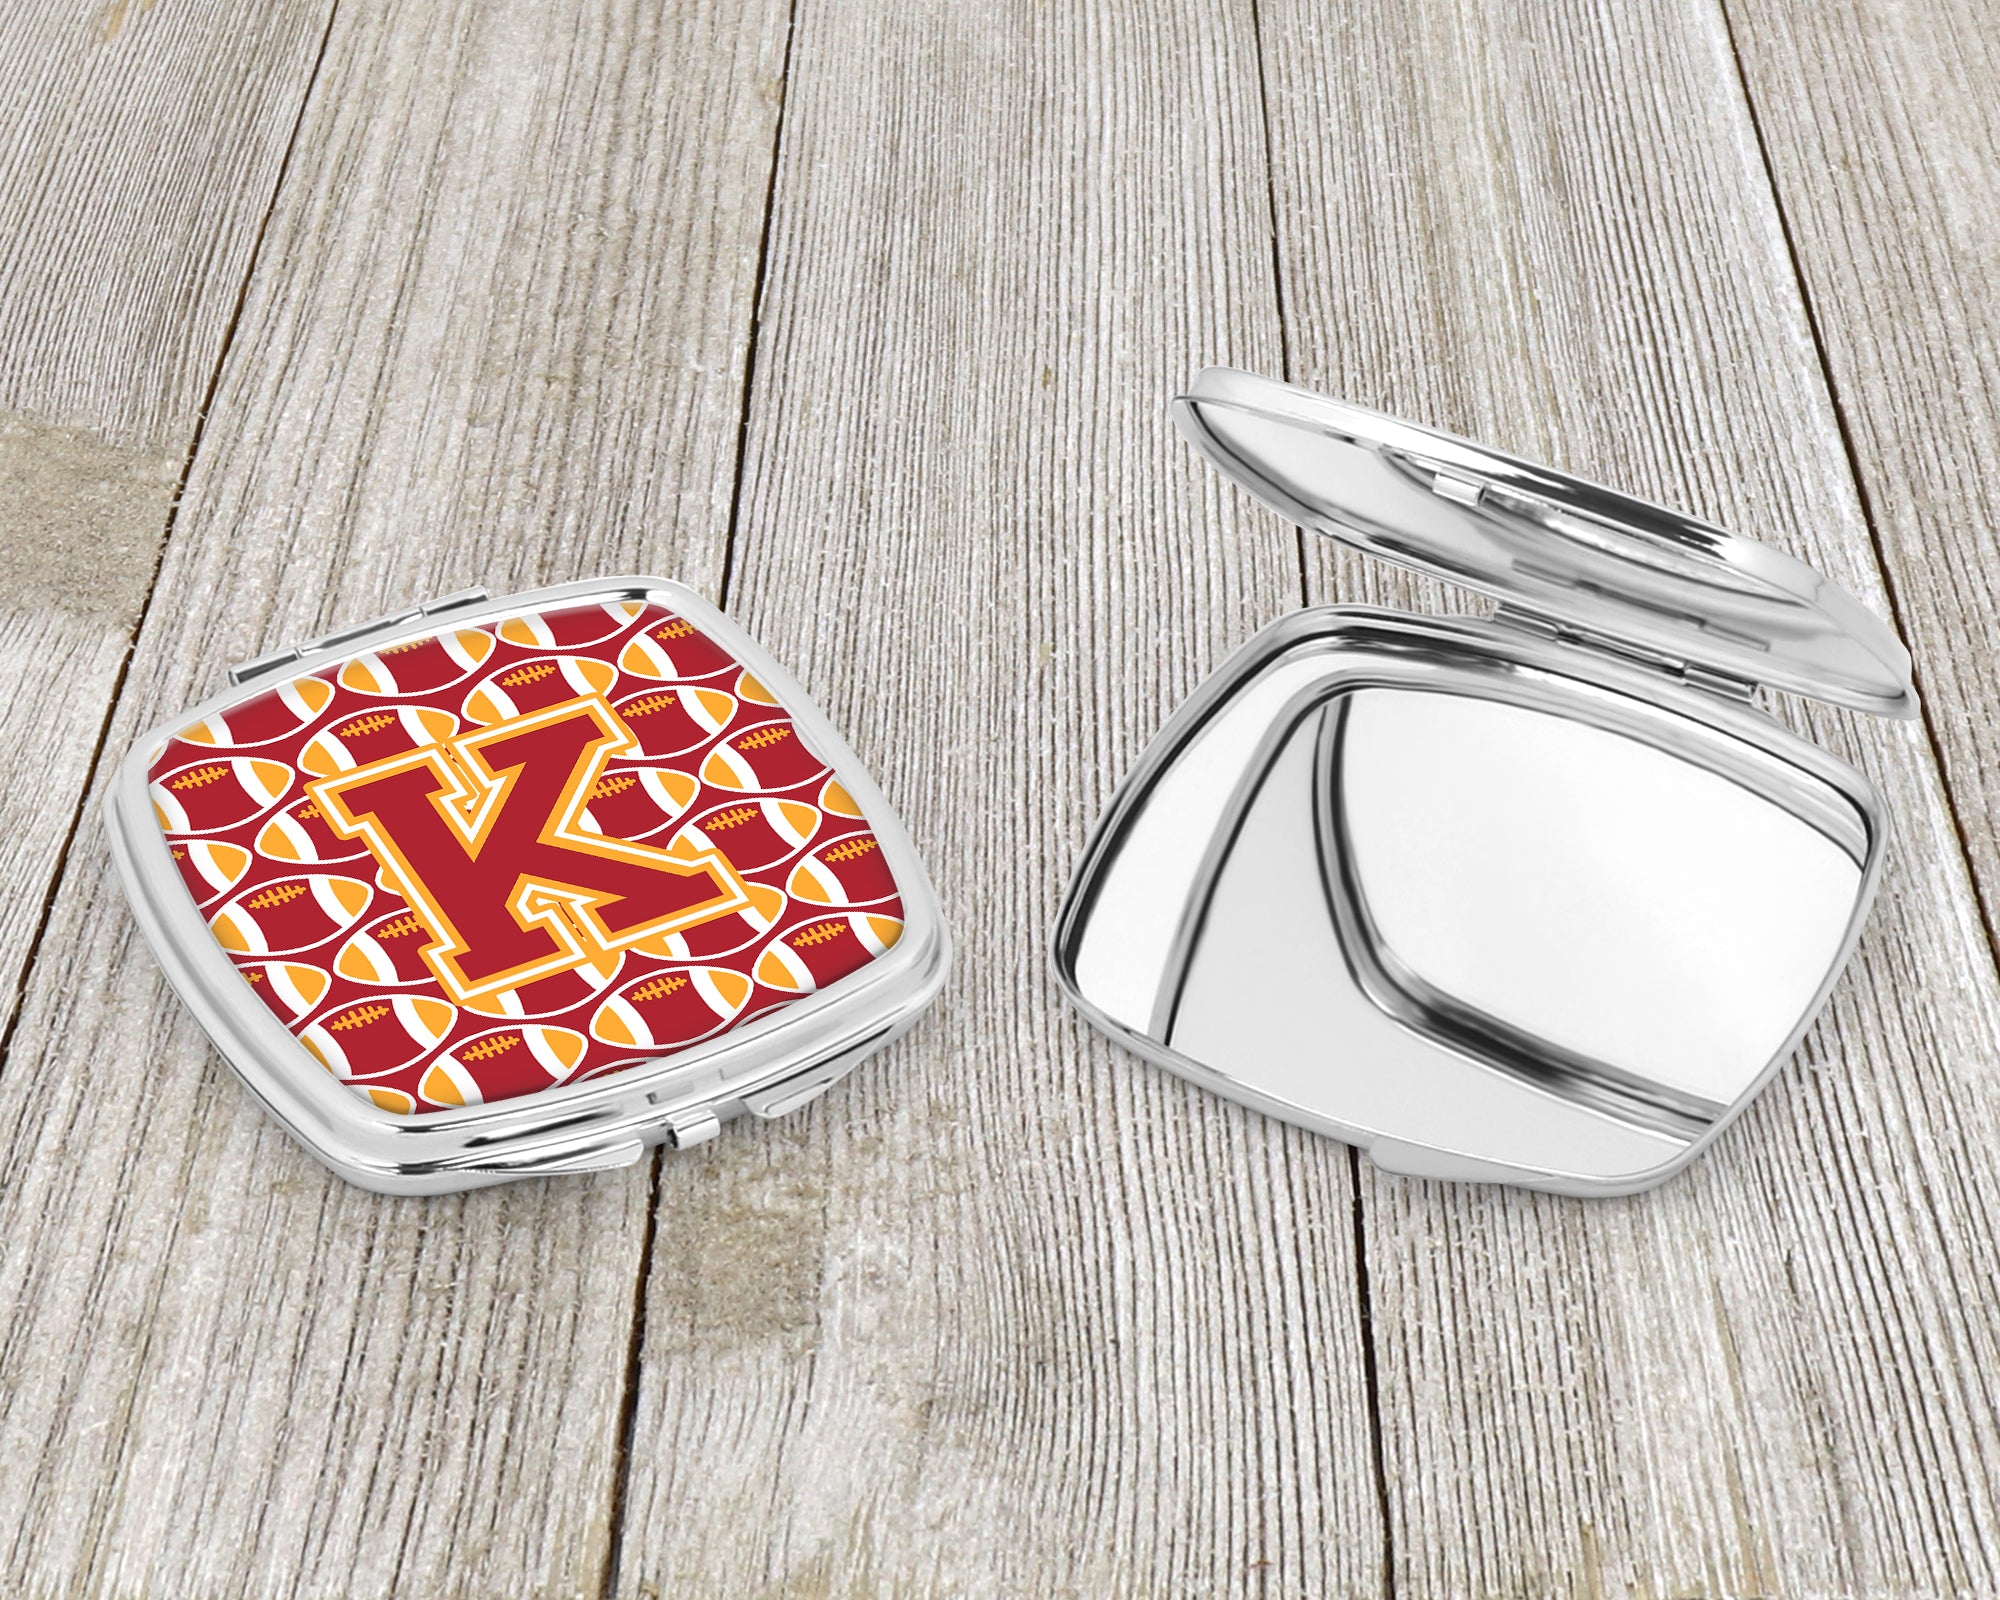 Letter K Football Cardinal and Gold Compact Mirror CJ1070-KSCM  the-store.com.